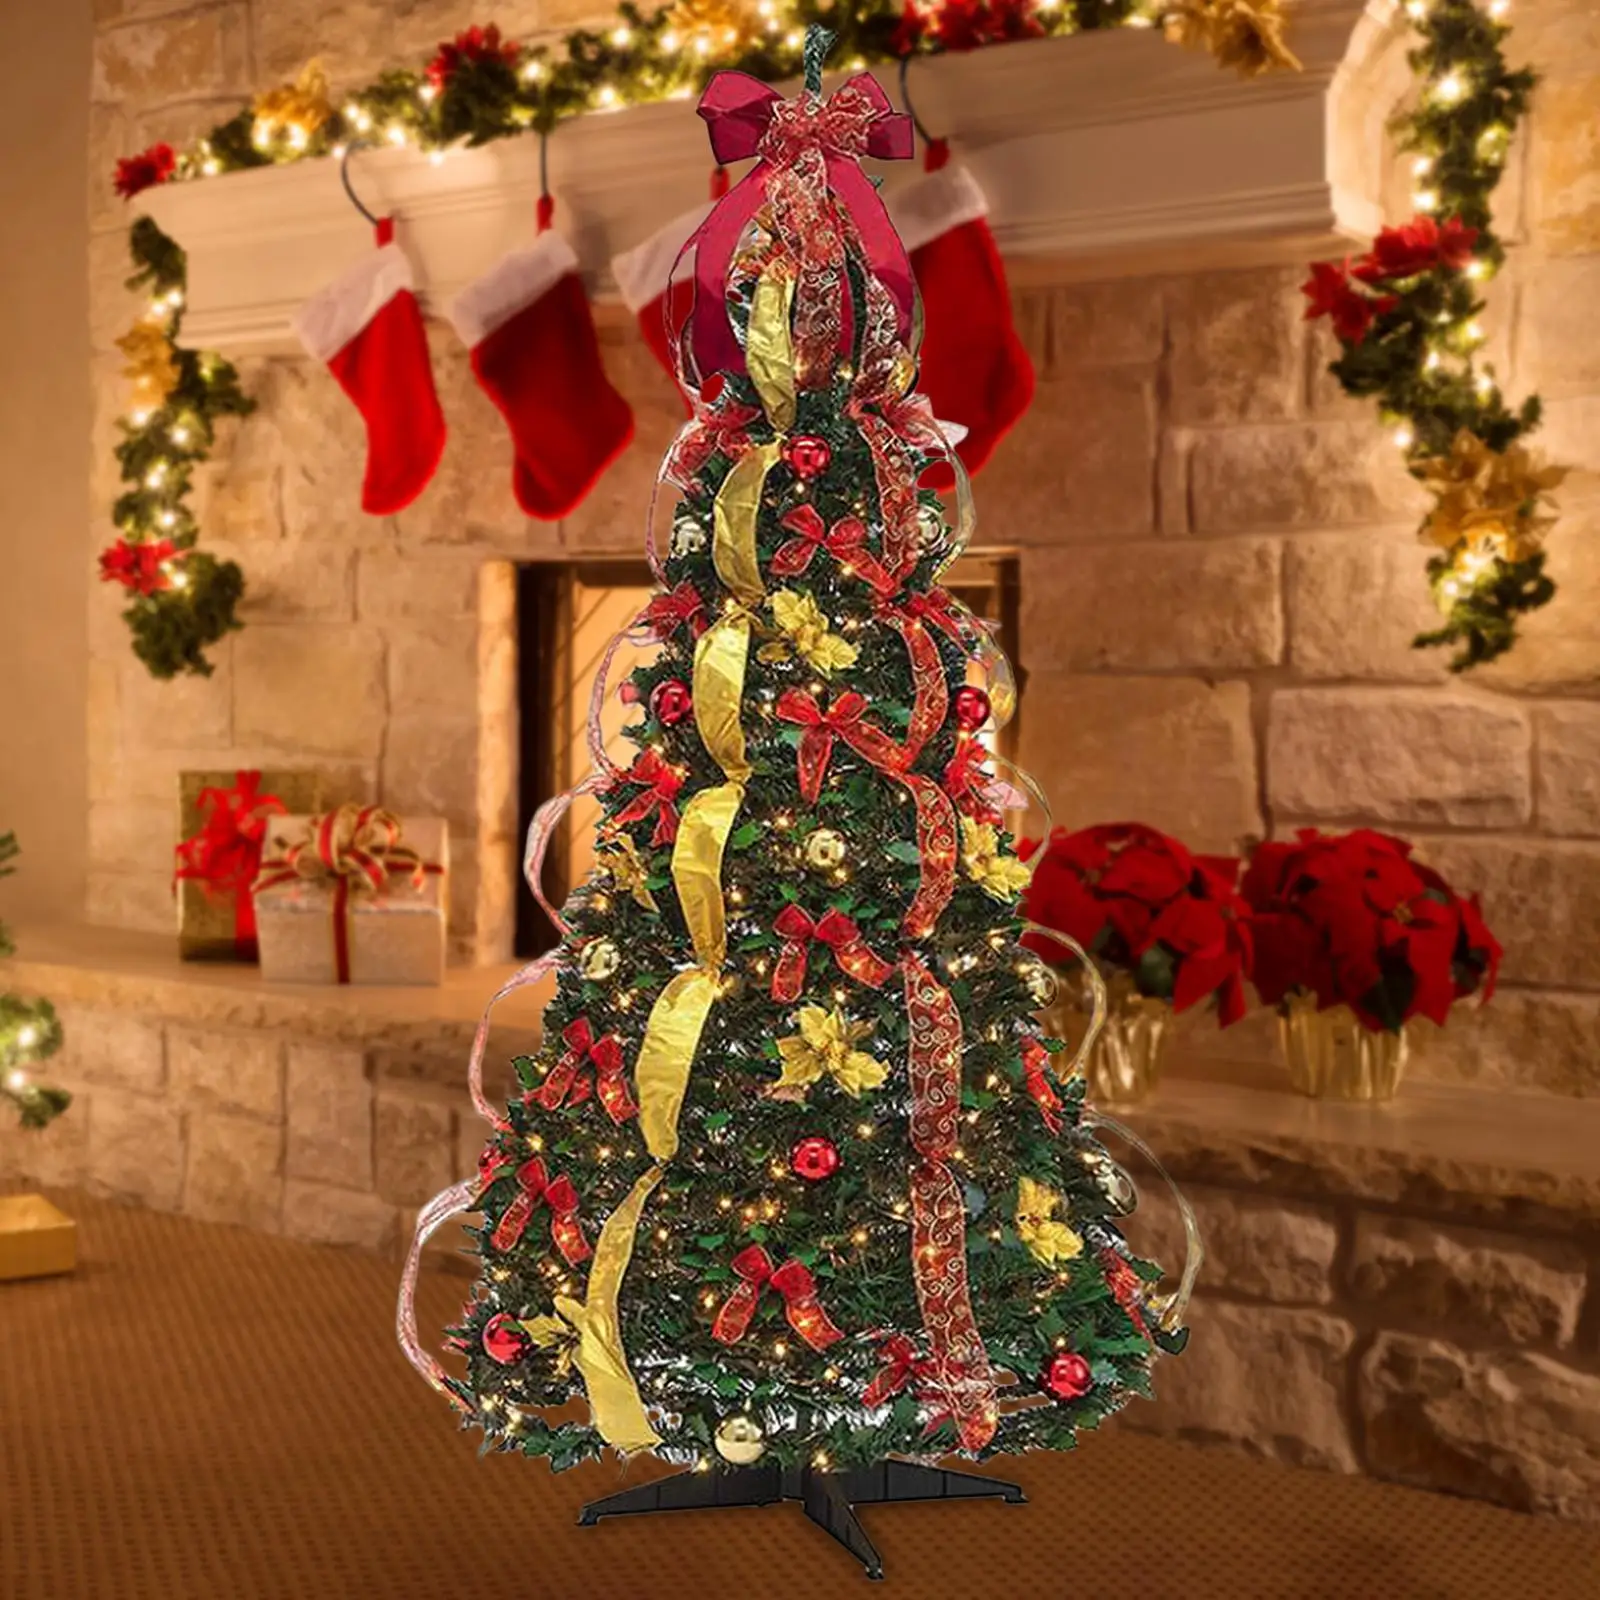 Foldable Christmas Tree 6 ft Holiday Party Decor Ornaments Artificial Christmas Tree for Indoor Home Office Outdoor Decoration